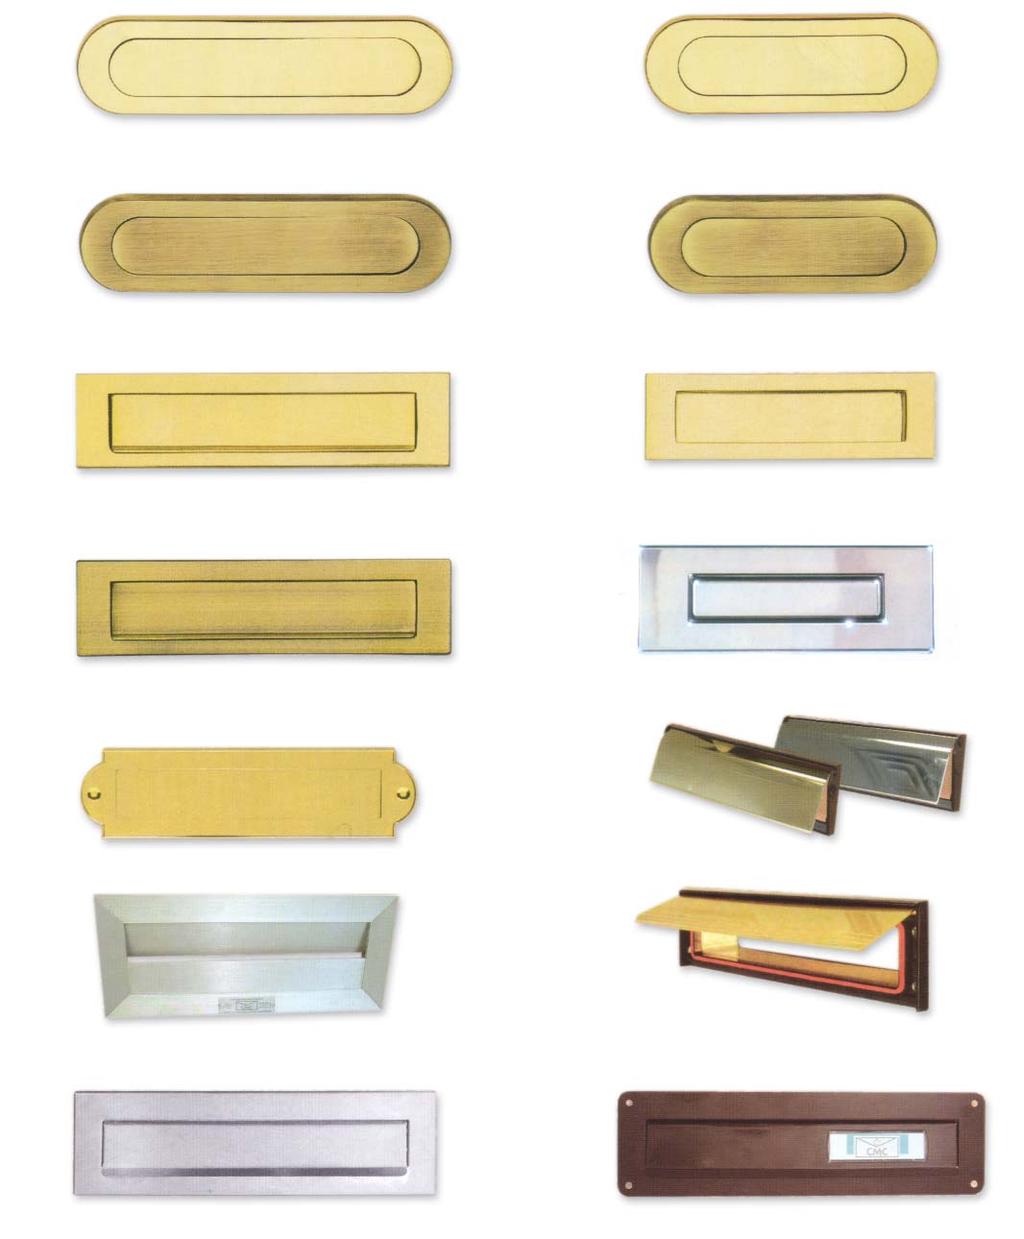 Letter plates - Mail slots & Internal flaps 4980 Polished solid brass 3 1/8 x 13 (80 x 330) 4981 Polished solid brass 3 1/8 x 10 (80 x 255) 4992 Antique solid brass 3 1/8 x 13 (80 x 330) 4993 Antique